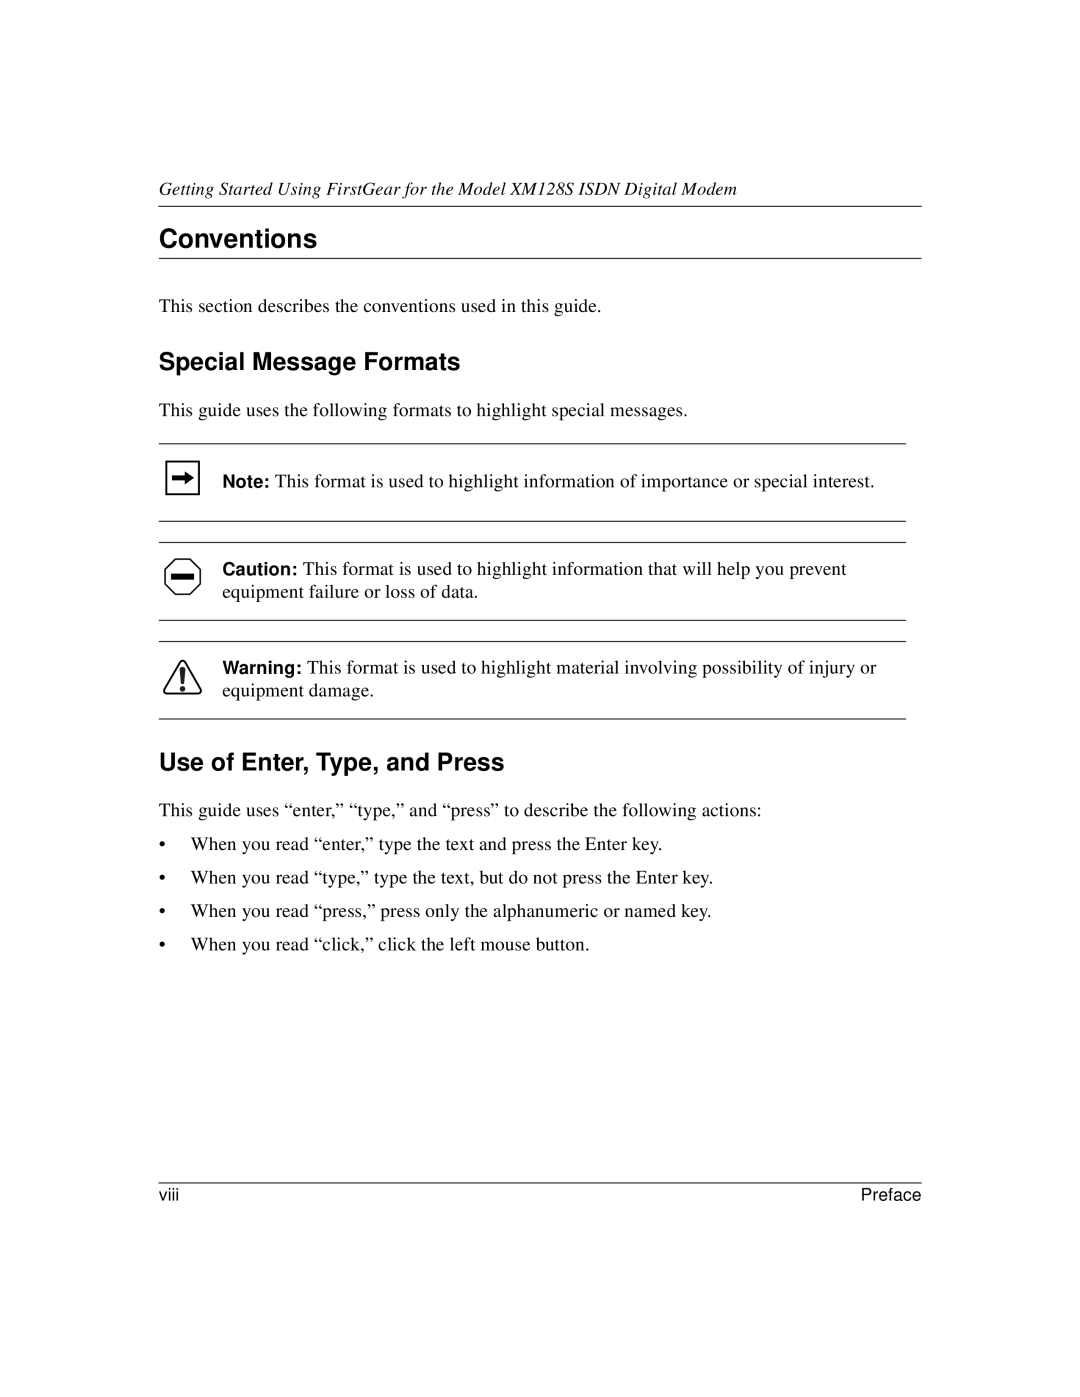 NETGEAR XM128S manual Conventions, Special Message Formats, Use of Enter, Type, and Press 